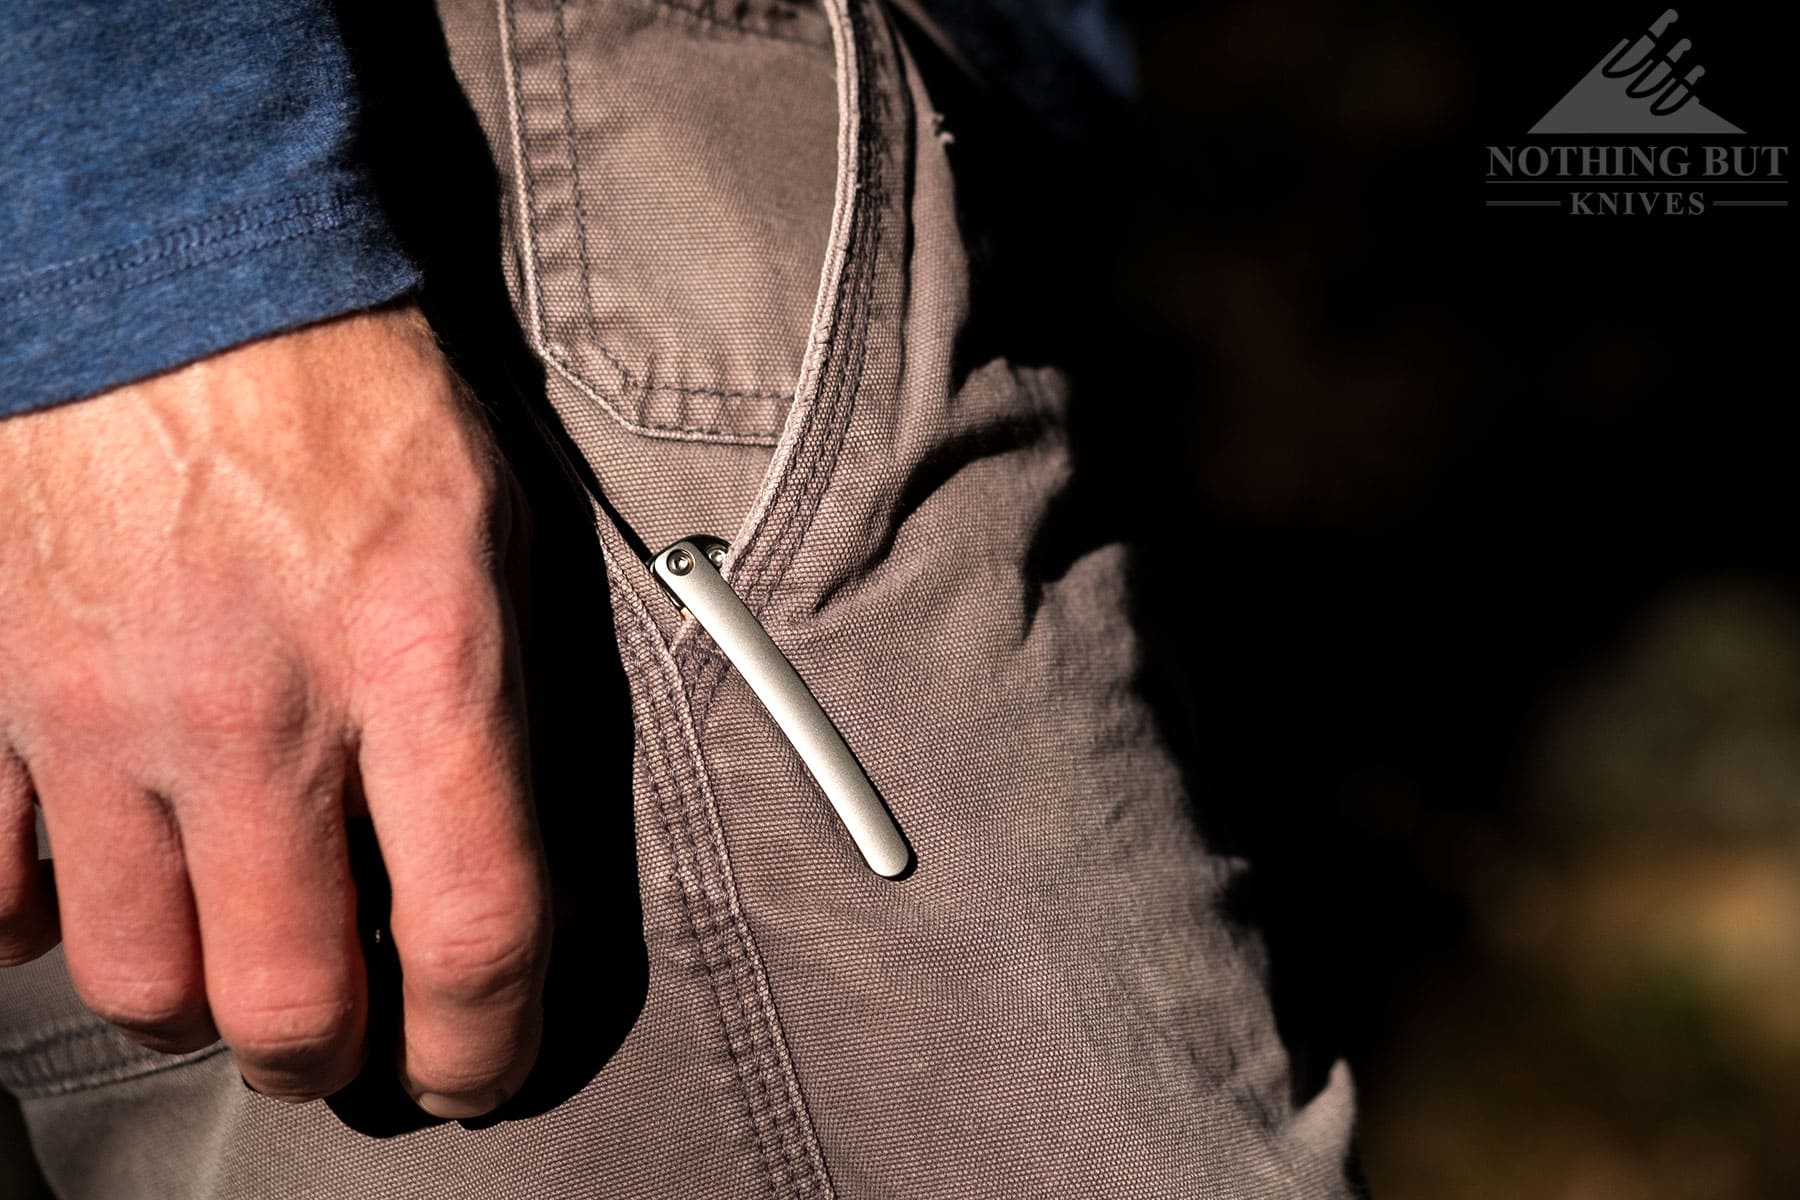 The titanium pocket clip rests easy in a pair of gray jeans.